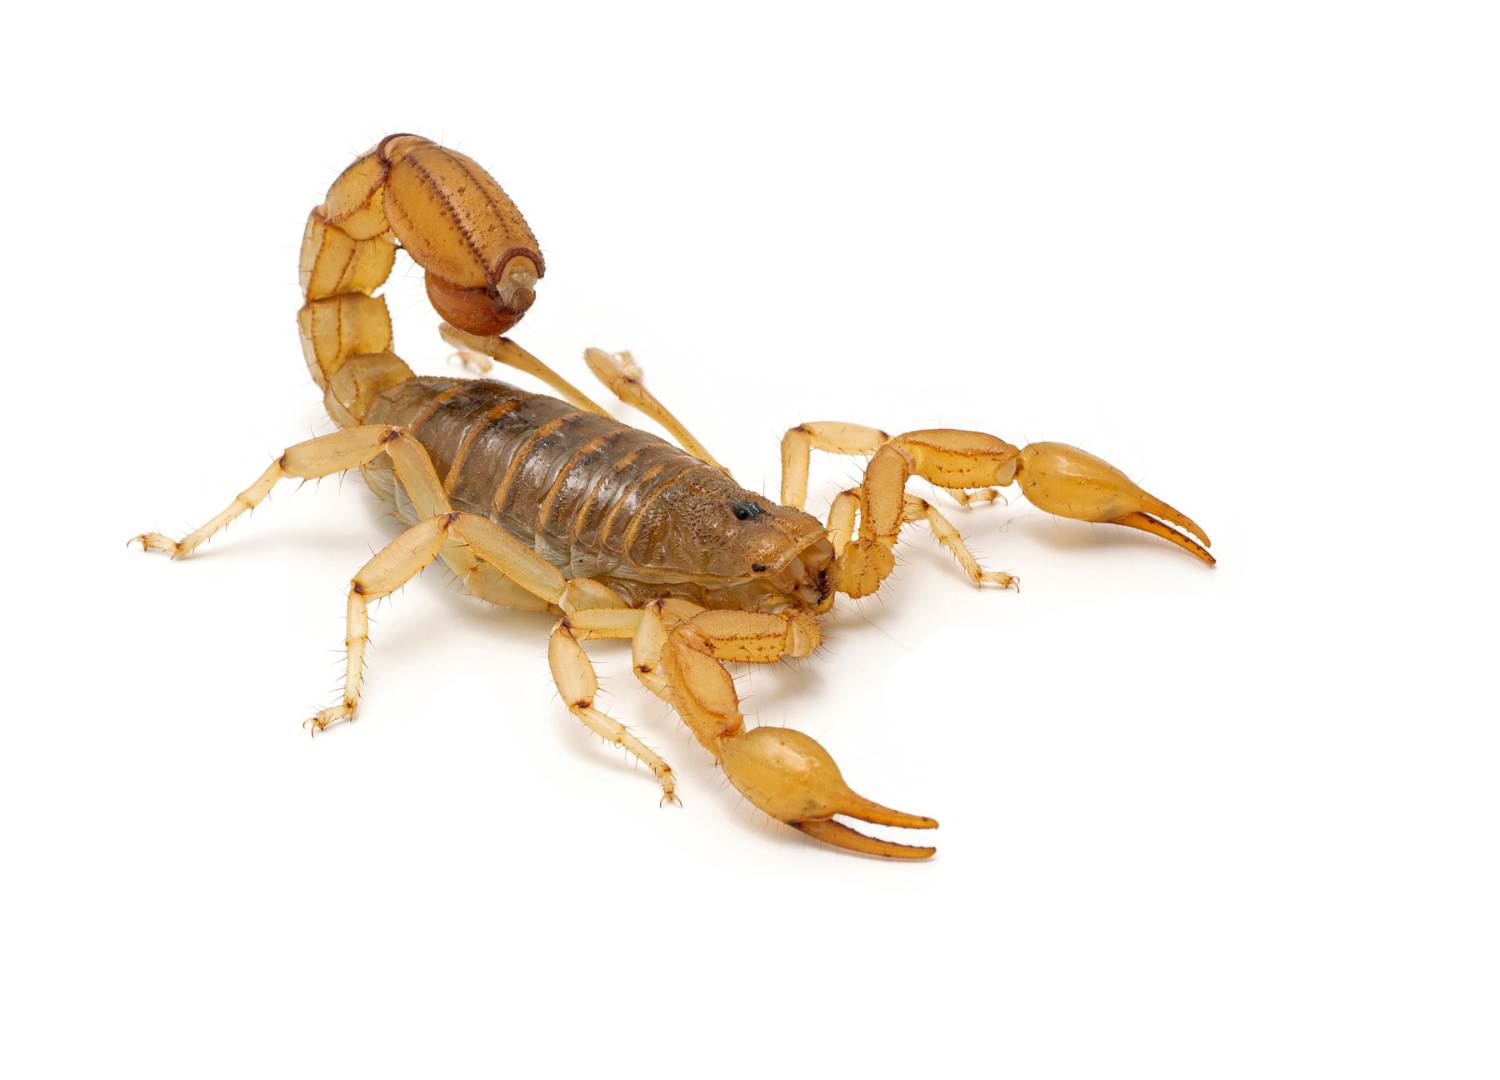 Adult female Arizona stripe-tailed scorpion, Paravaejovis spinigerus, isolated on white. This species is common in Arizona and southwestern New Mexico, United States